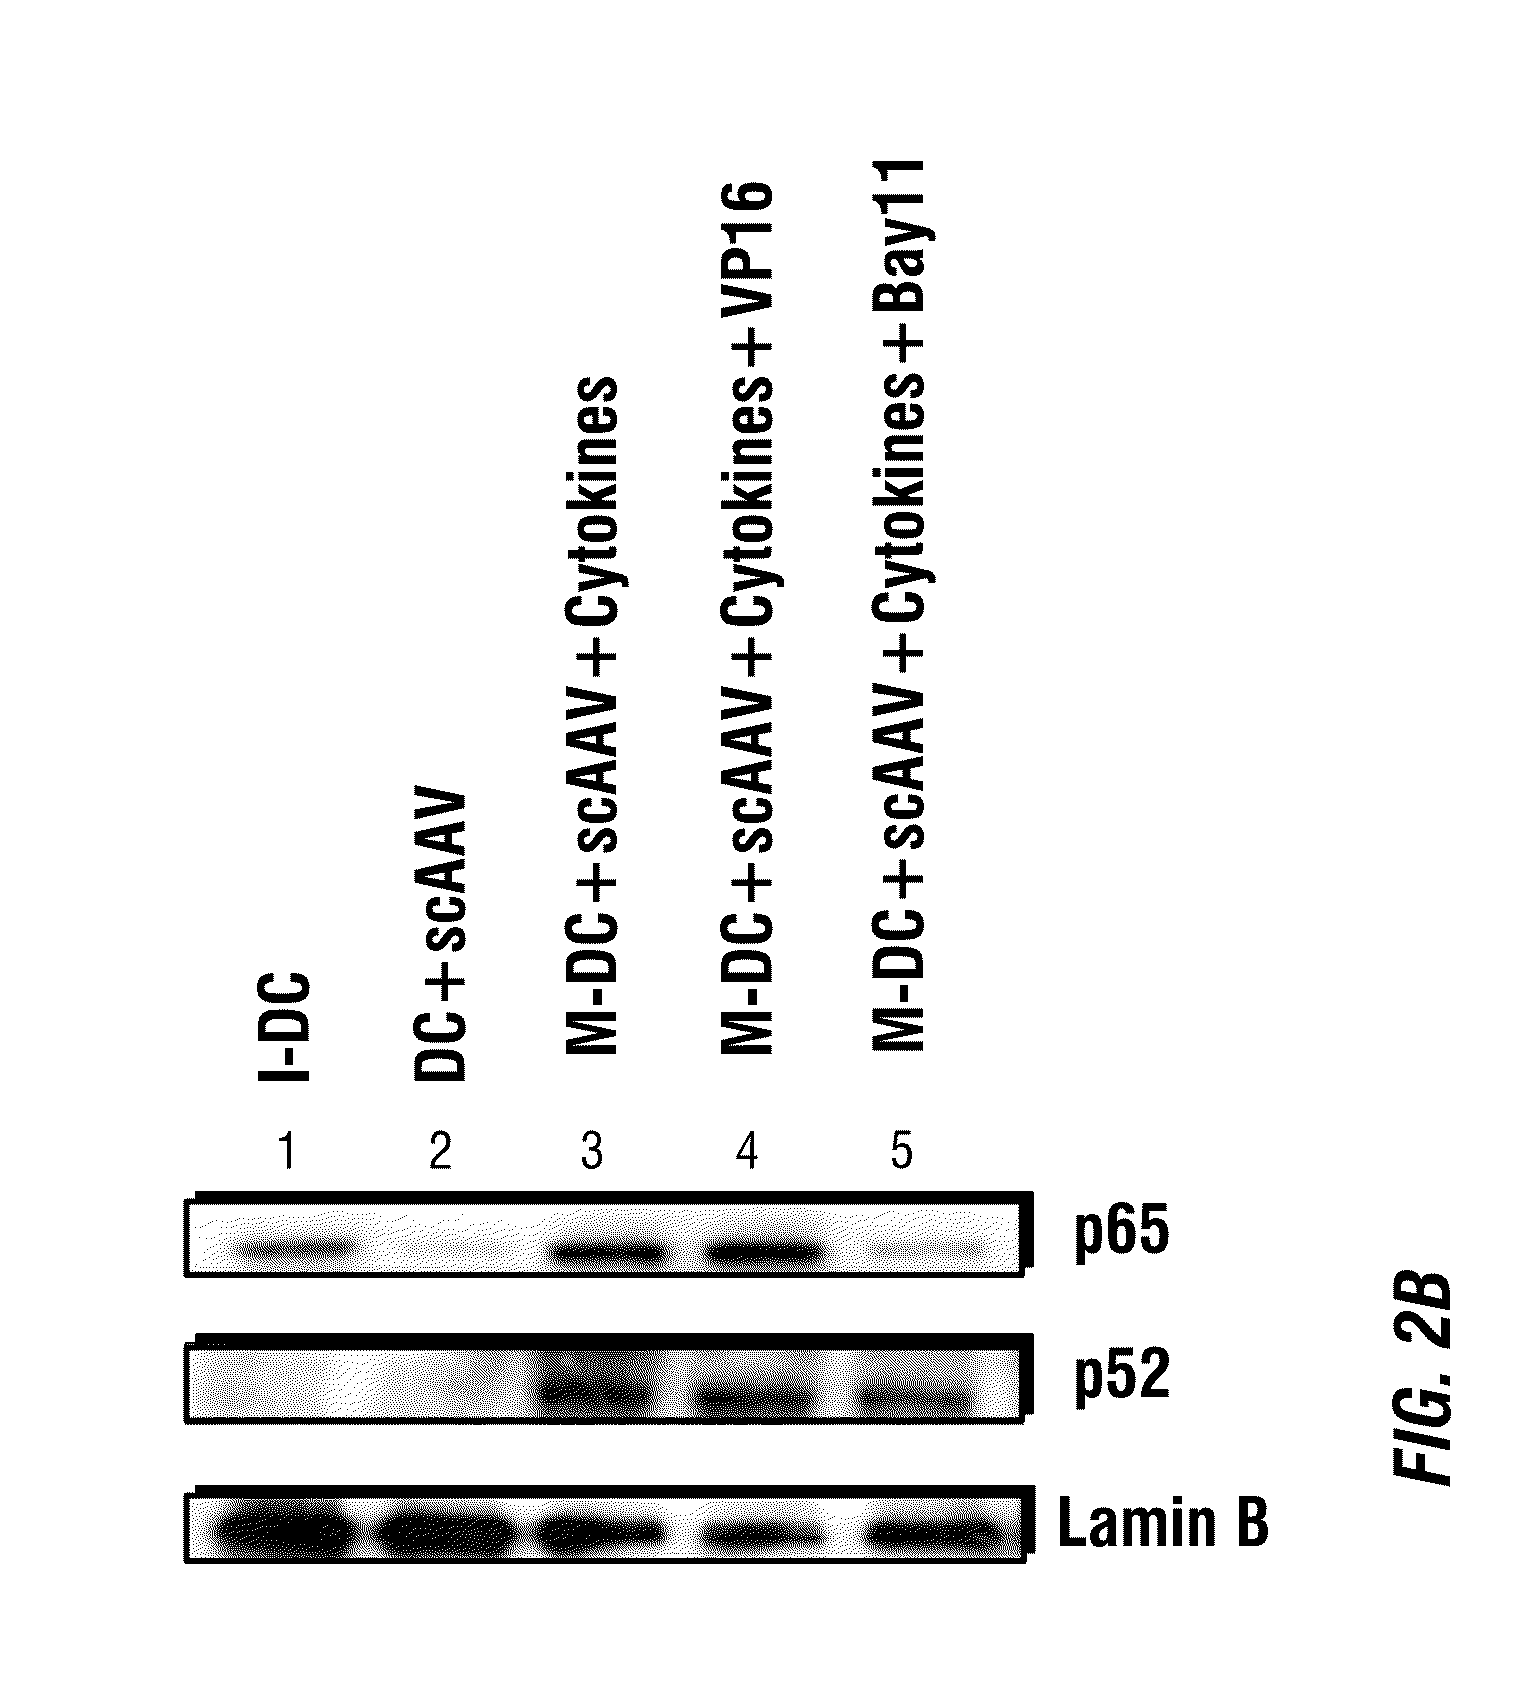 CAPSID-MODIFIED rAAV VECTOR COMPOSITIONS HAVING IMPROVED TRANSDUCTION EFFICIENCIES, AND METHODS OF USE